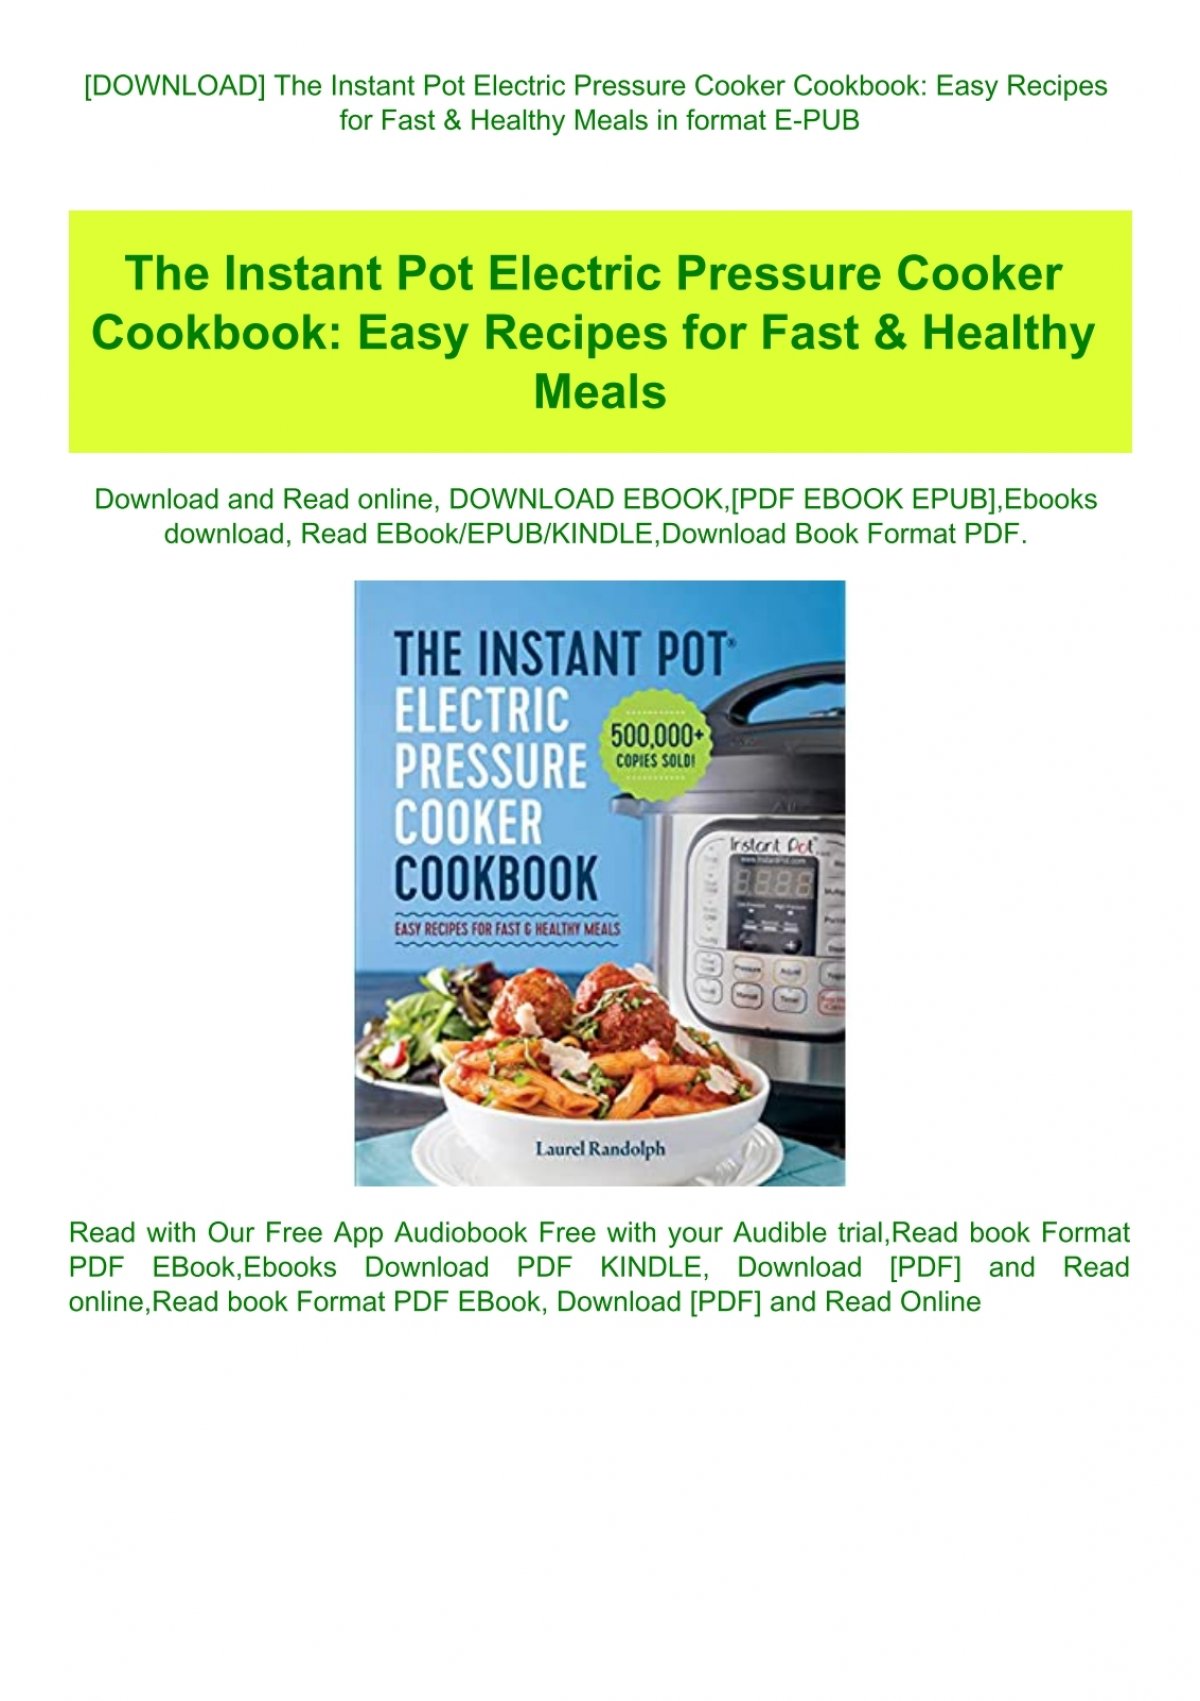 Instant Pot Electric Pressure Cooker Cookbook Easy Recipes For Fast Healthy Meals Download Free Ebook